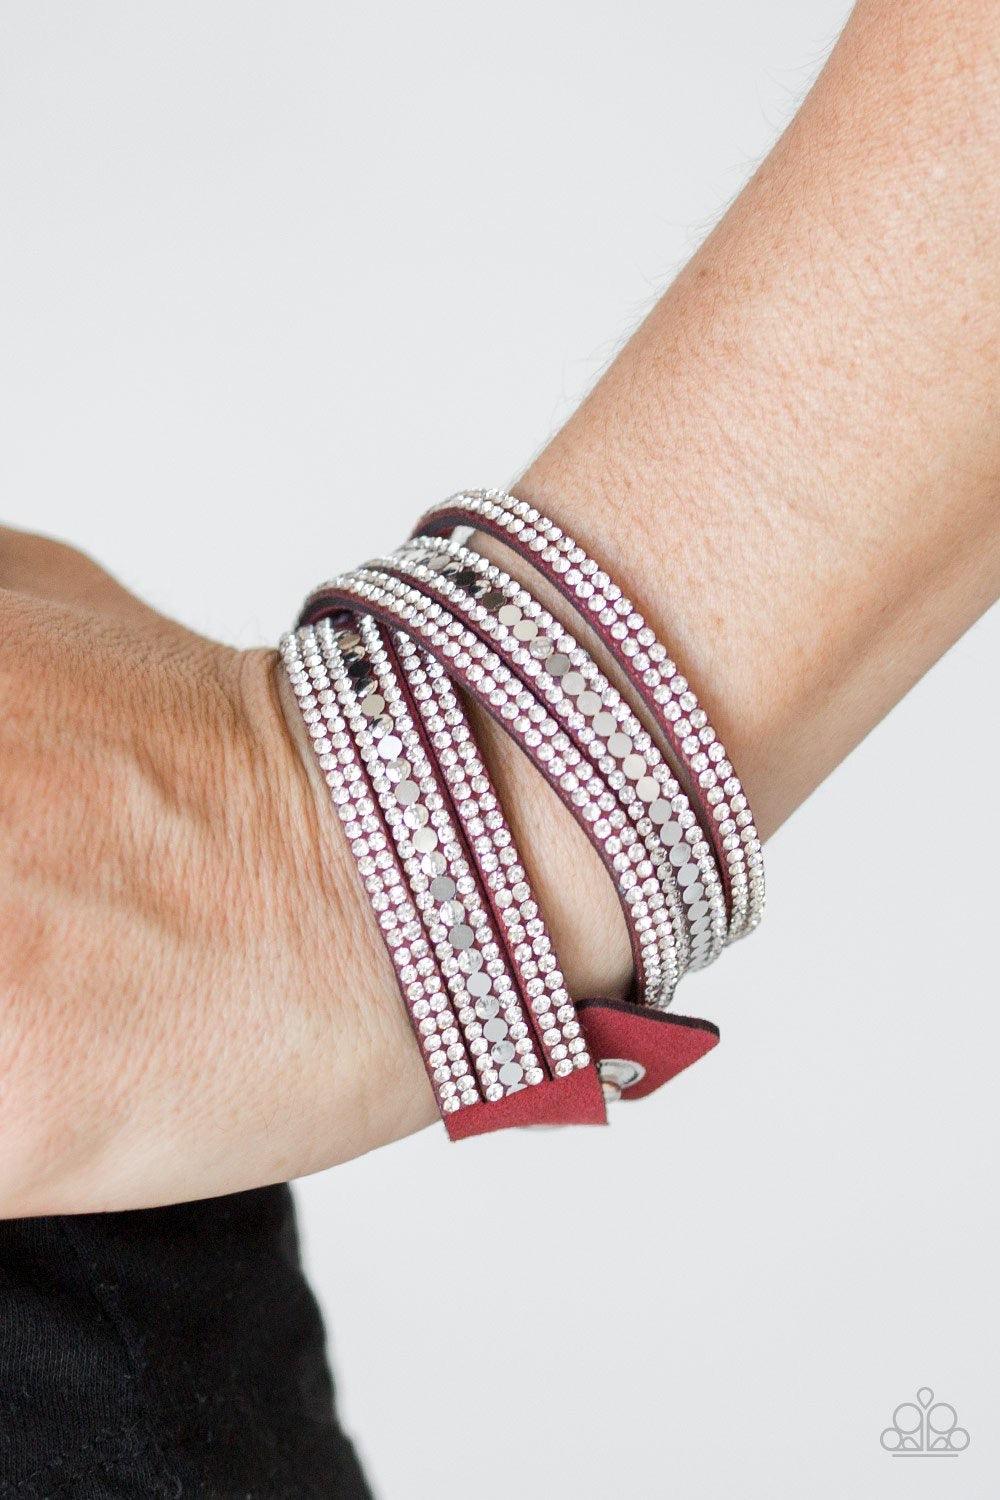 Paparazzi Accessories Rock Star Attitude - Red Encrusted in rows of glassy white rhinestones and flat silver studs, three strands of red suede wrap around the wrist for a sassy look. The elongated band allows for a trendy double wrap around the wrist. Fea